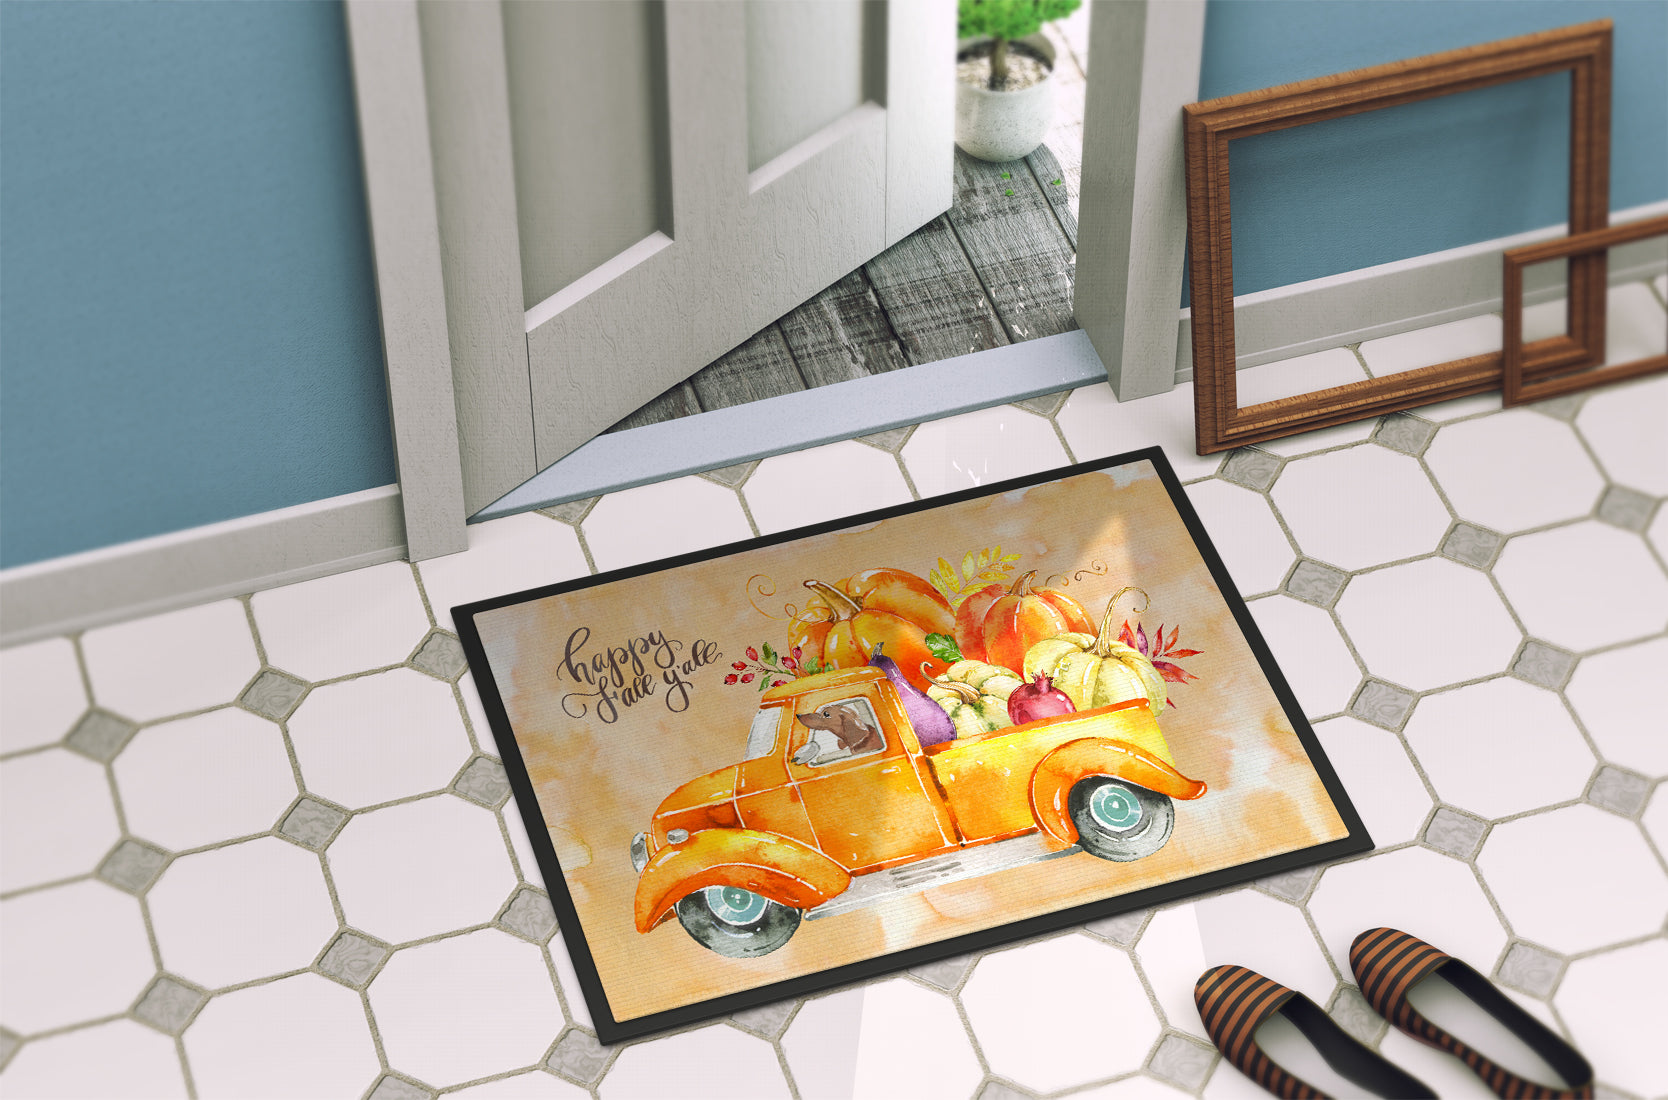 Fall Harvest Red Dachshund Indoor or Outdoor Mat 18x27 CK2677MAT - the-store.com